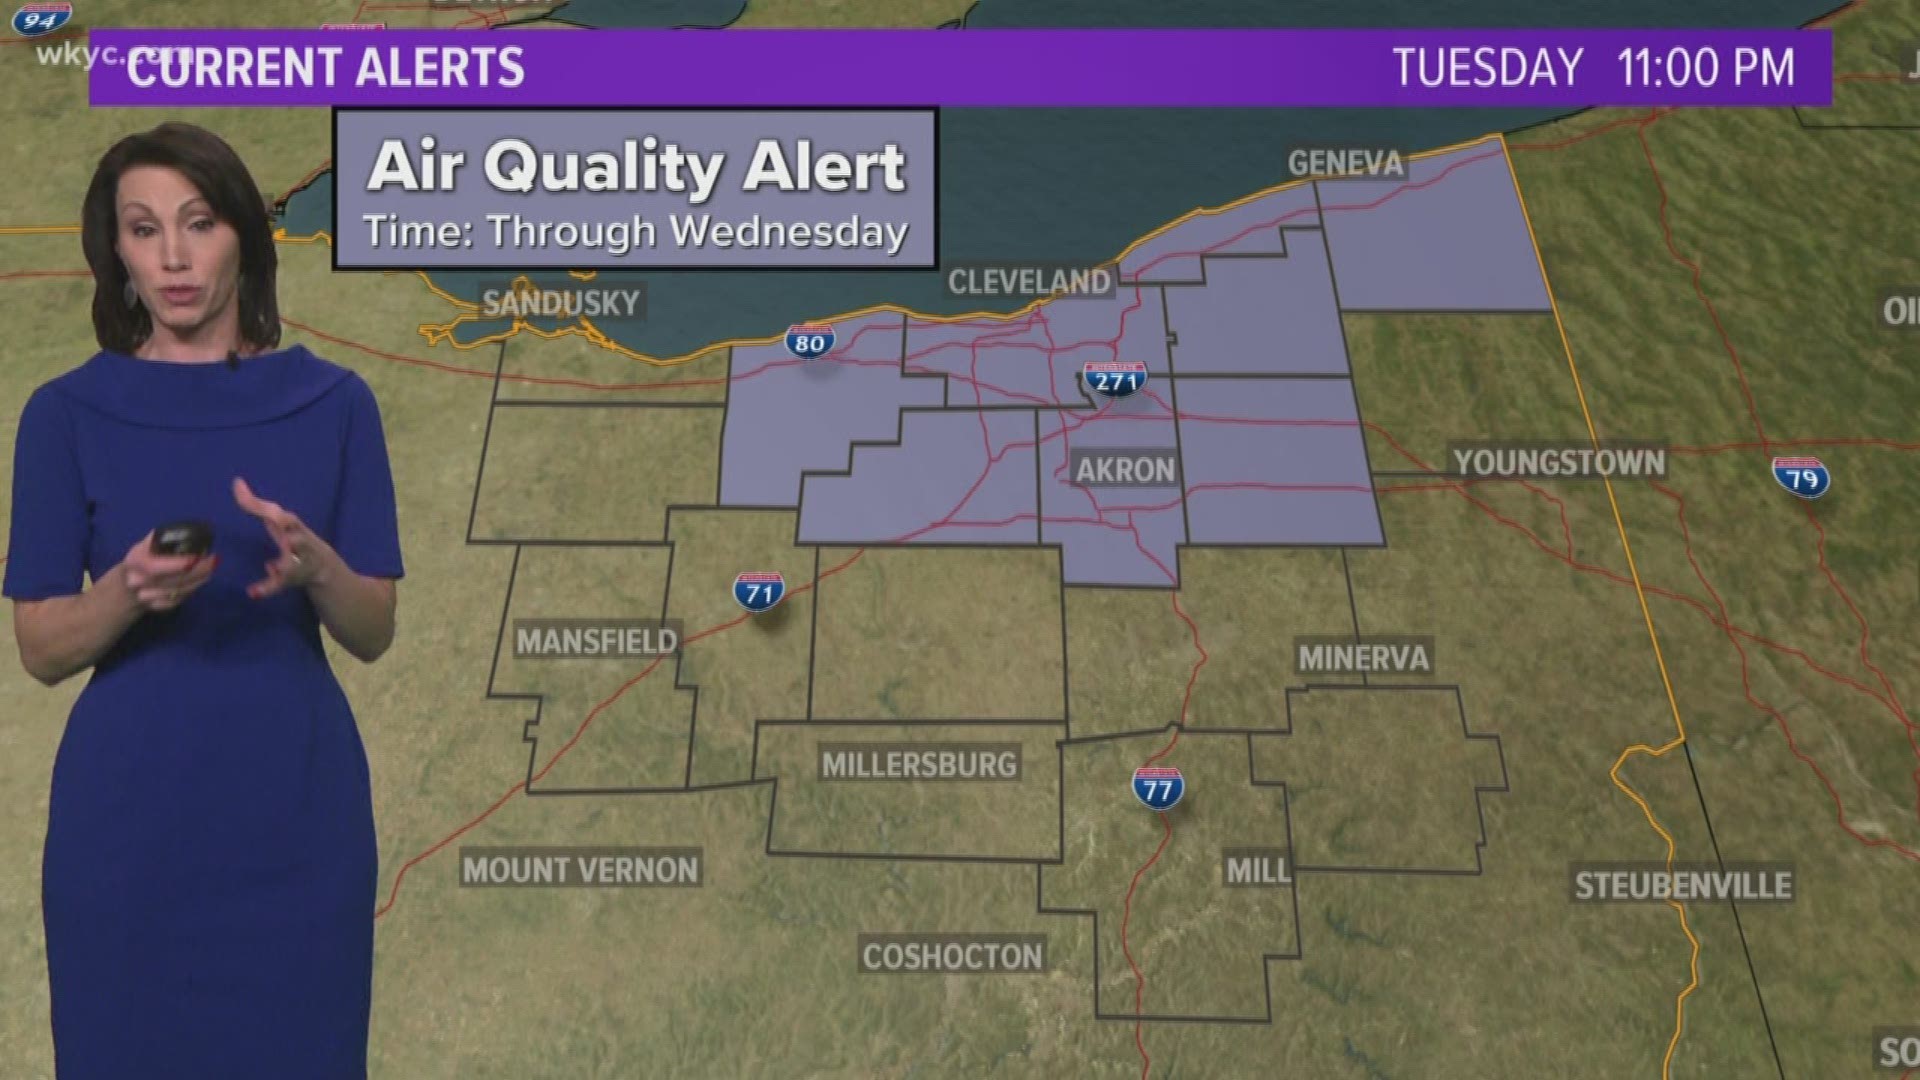 Look for some sun to peek out on Wednesday with temperatures in the mid 40s. There's an Air Quality Alert for sensitive groups in Northeast Ohio.